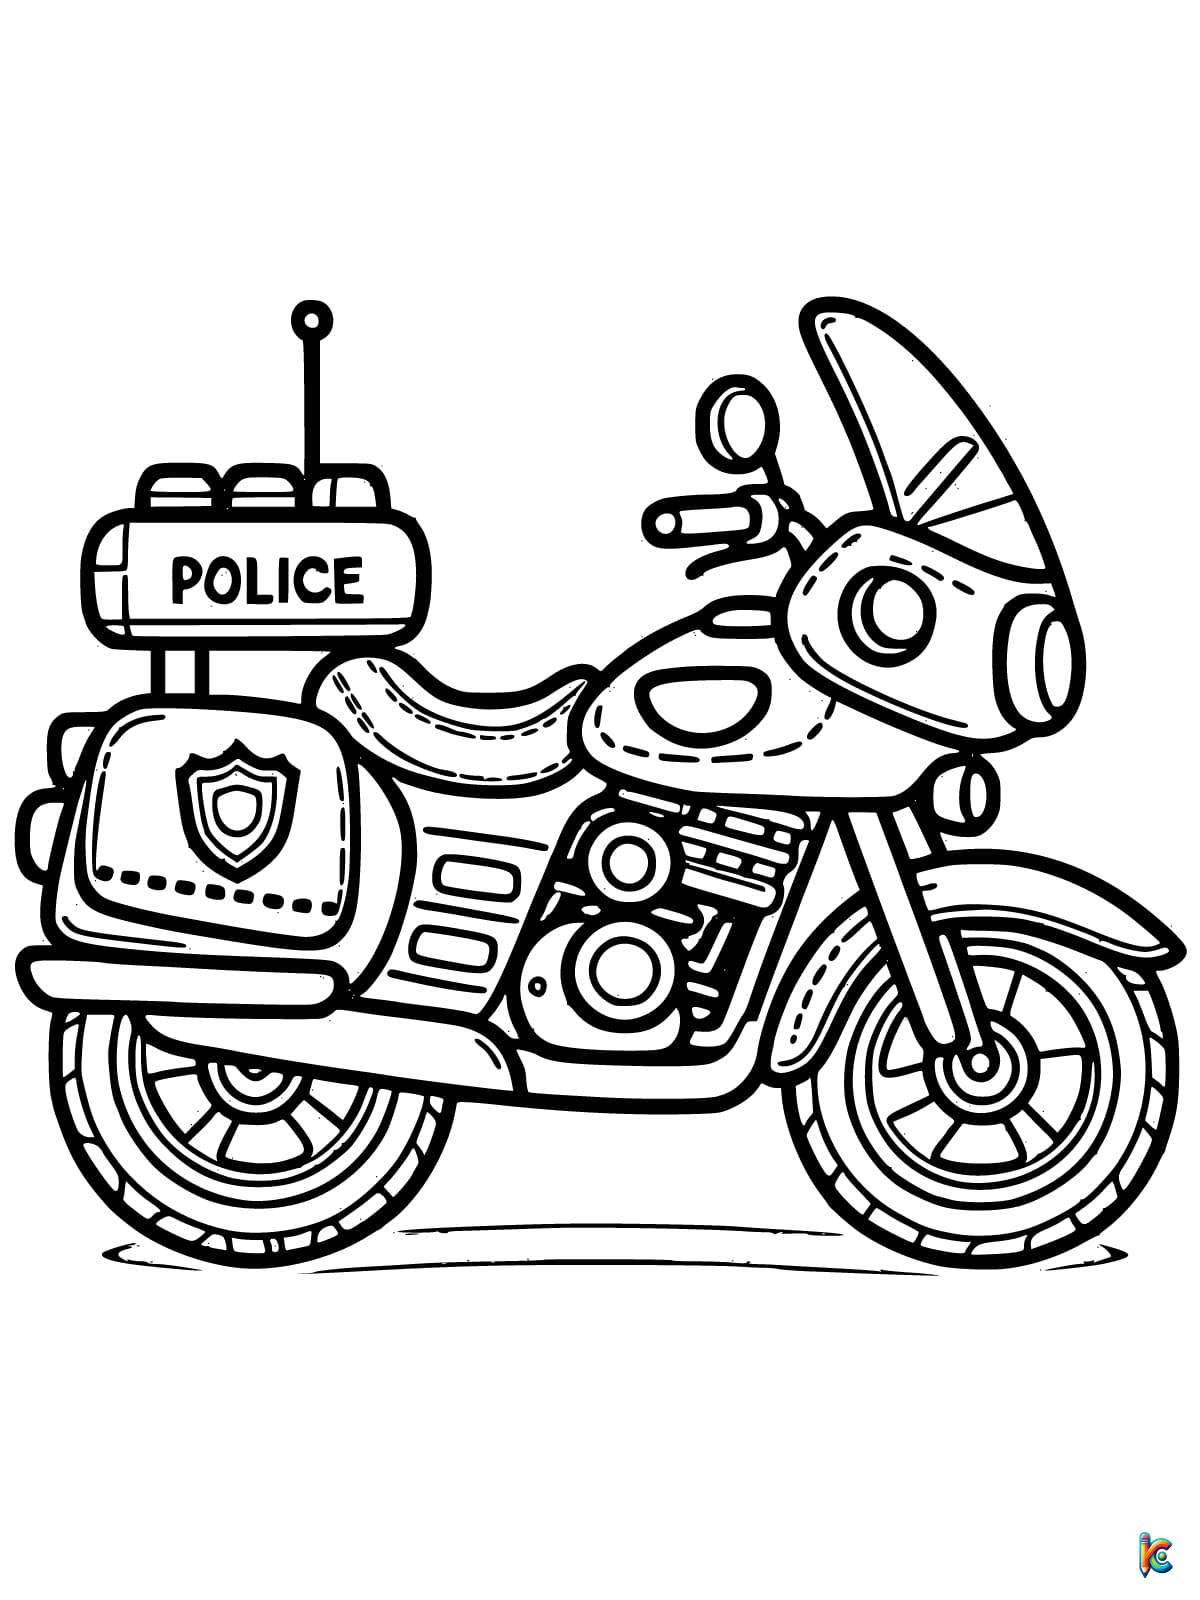 police motorcycle coloring page